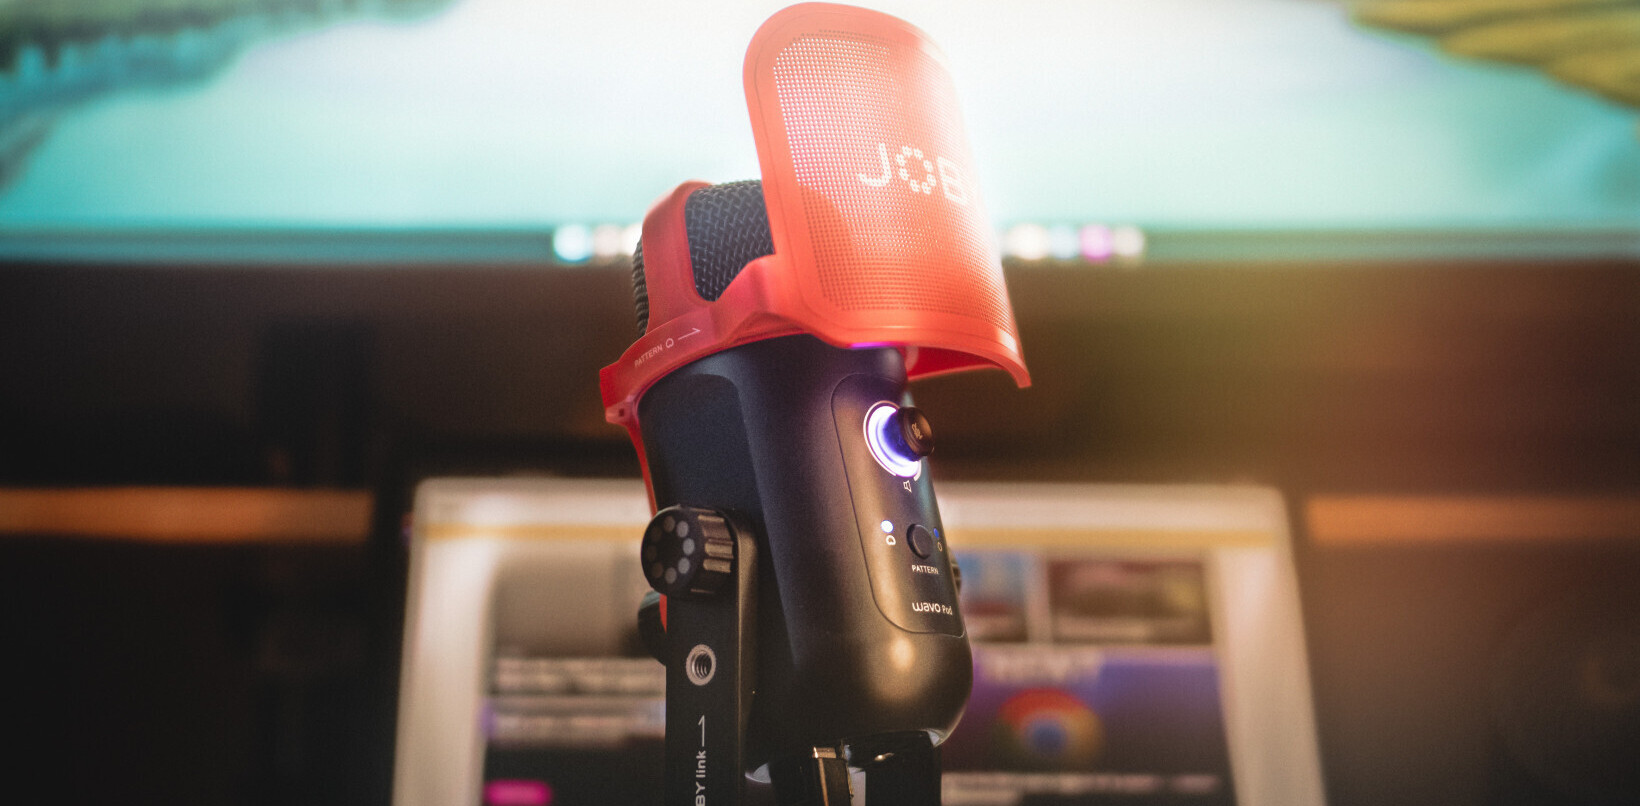 Want to start a podcast? Joby’s Wavo Pod could be the microphone for you